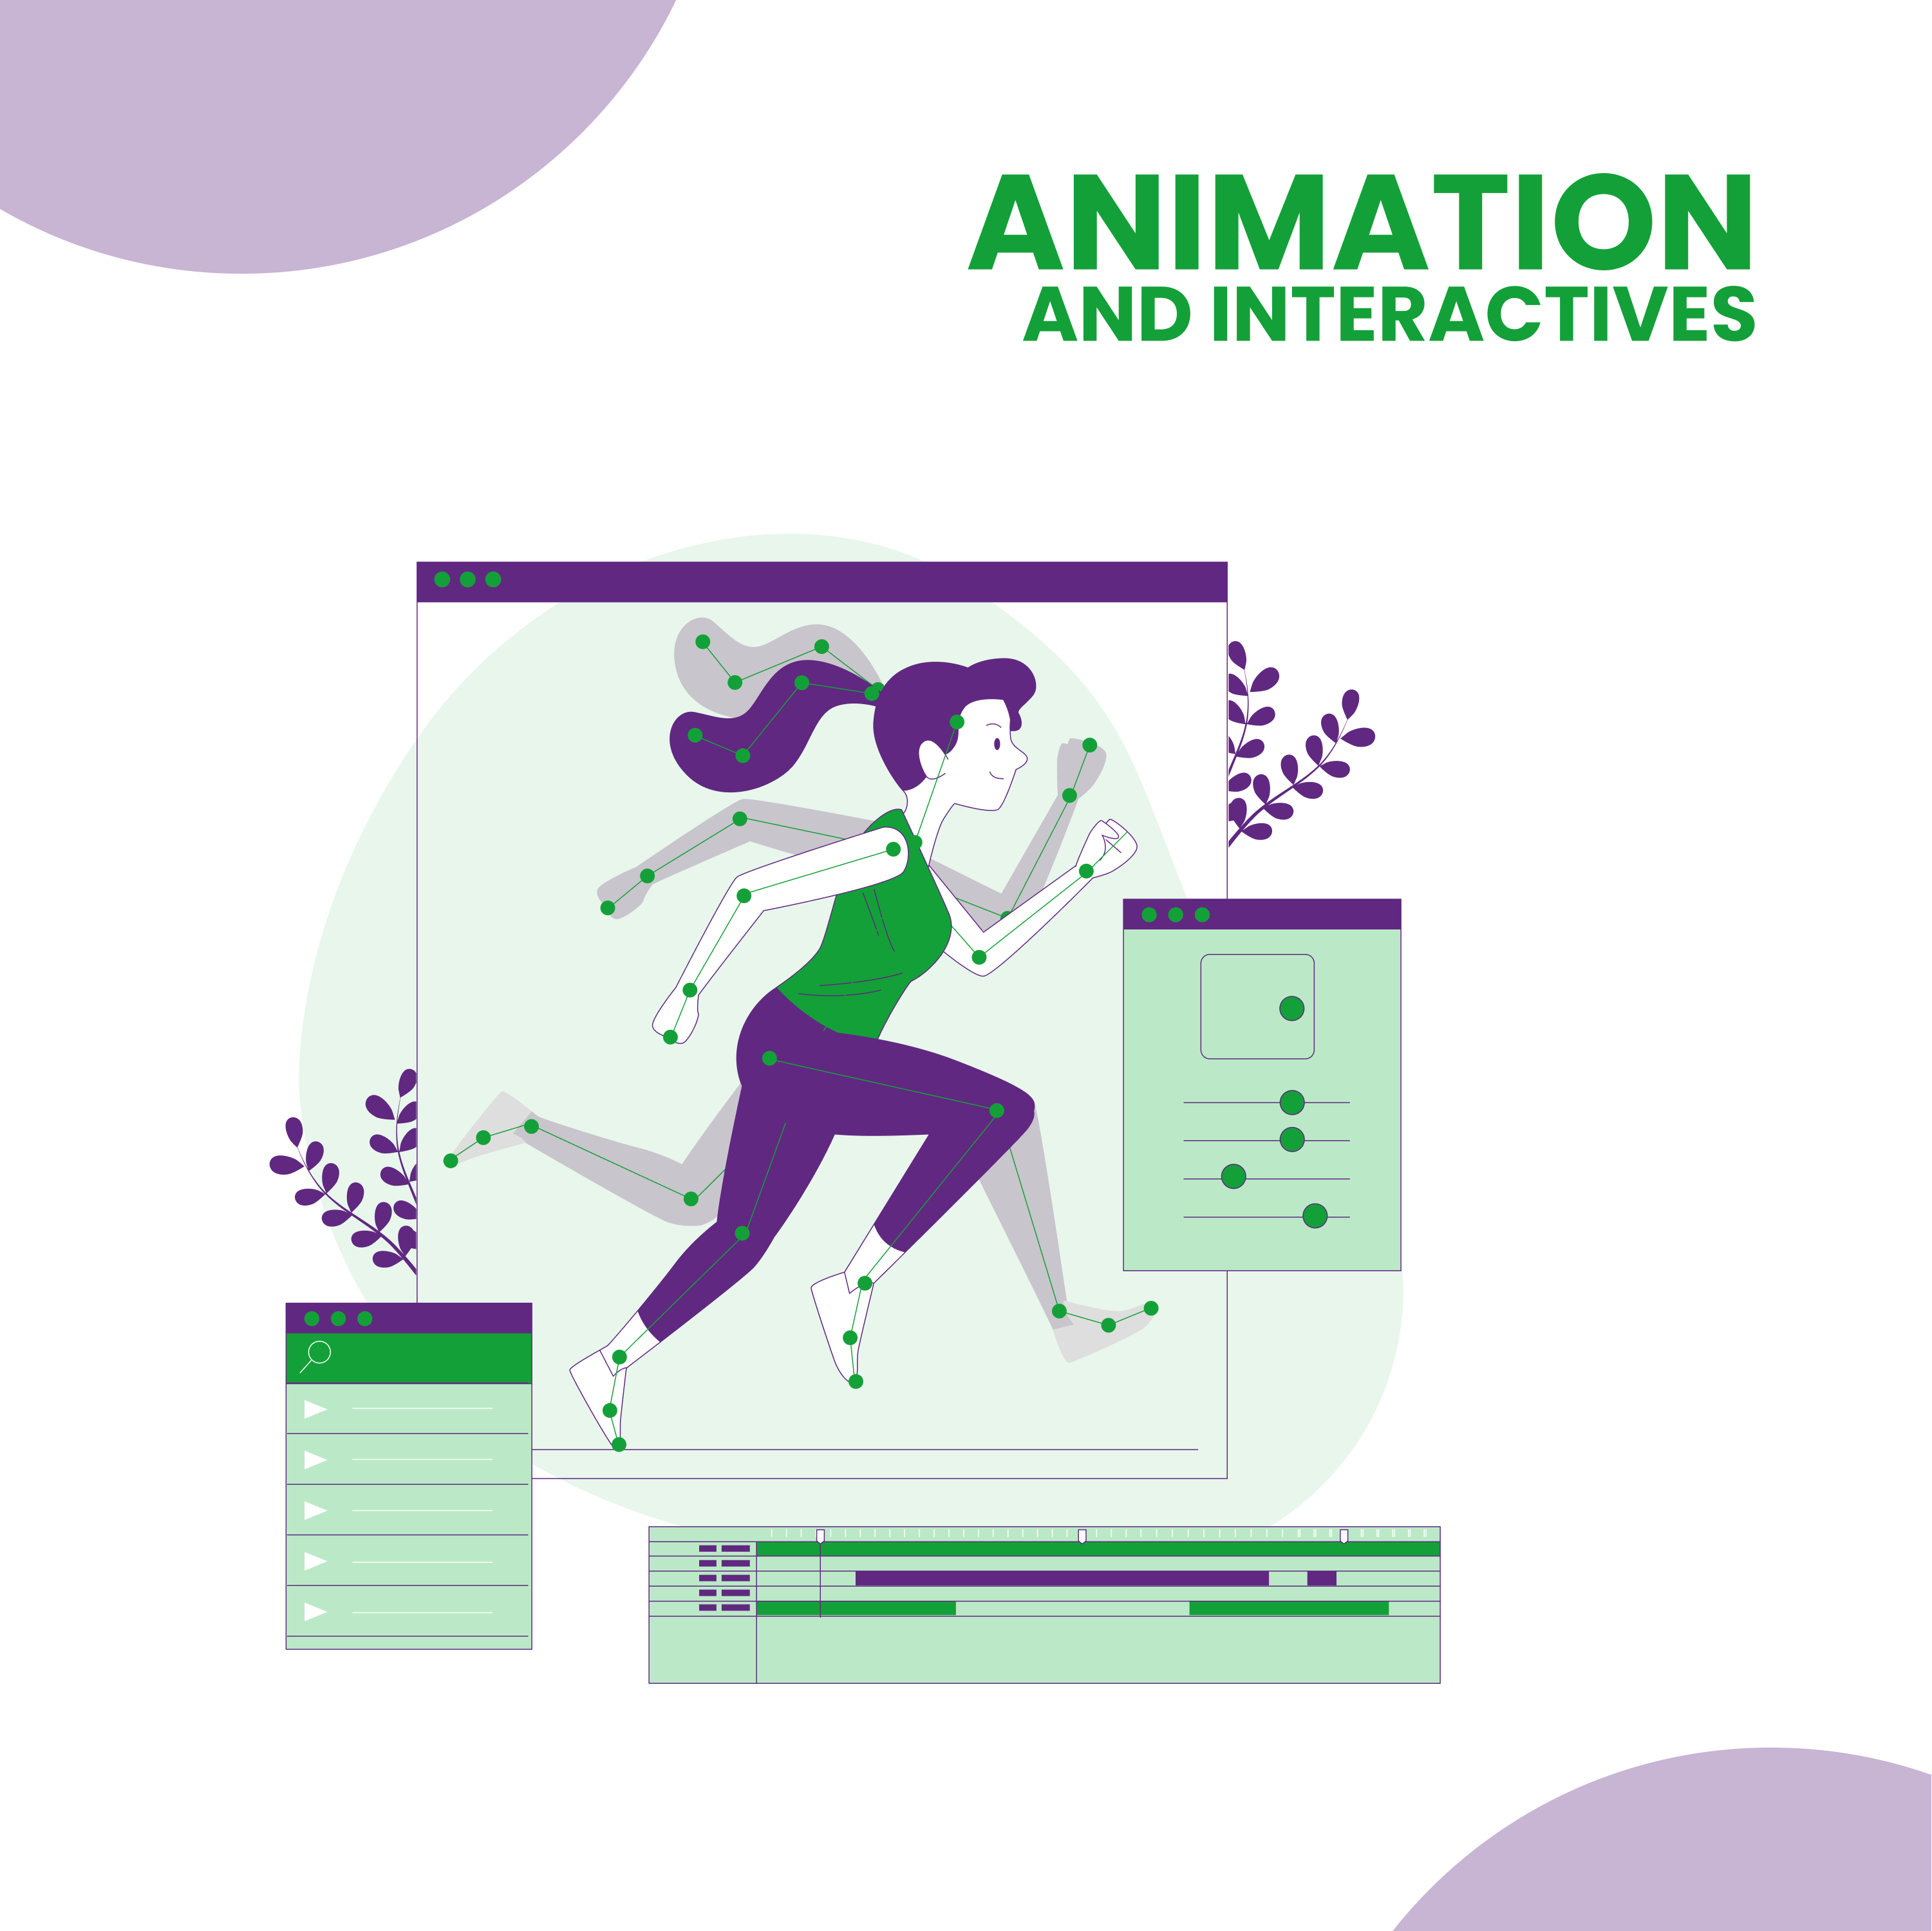 Animation and Interactives